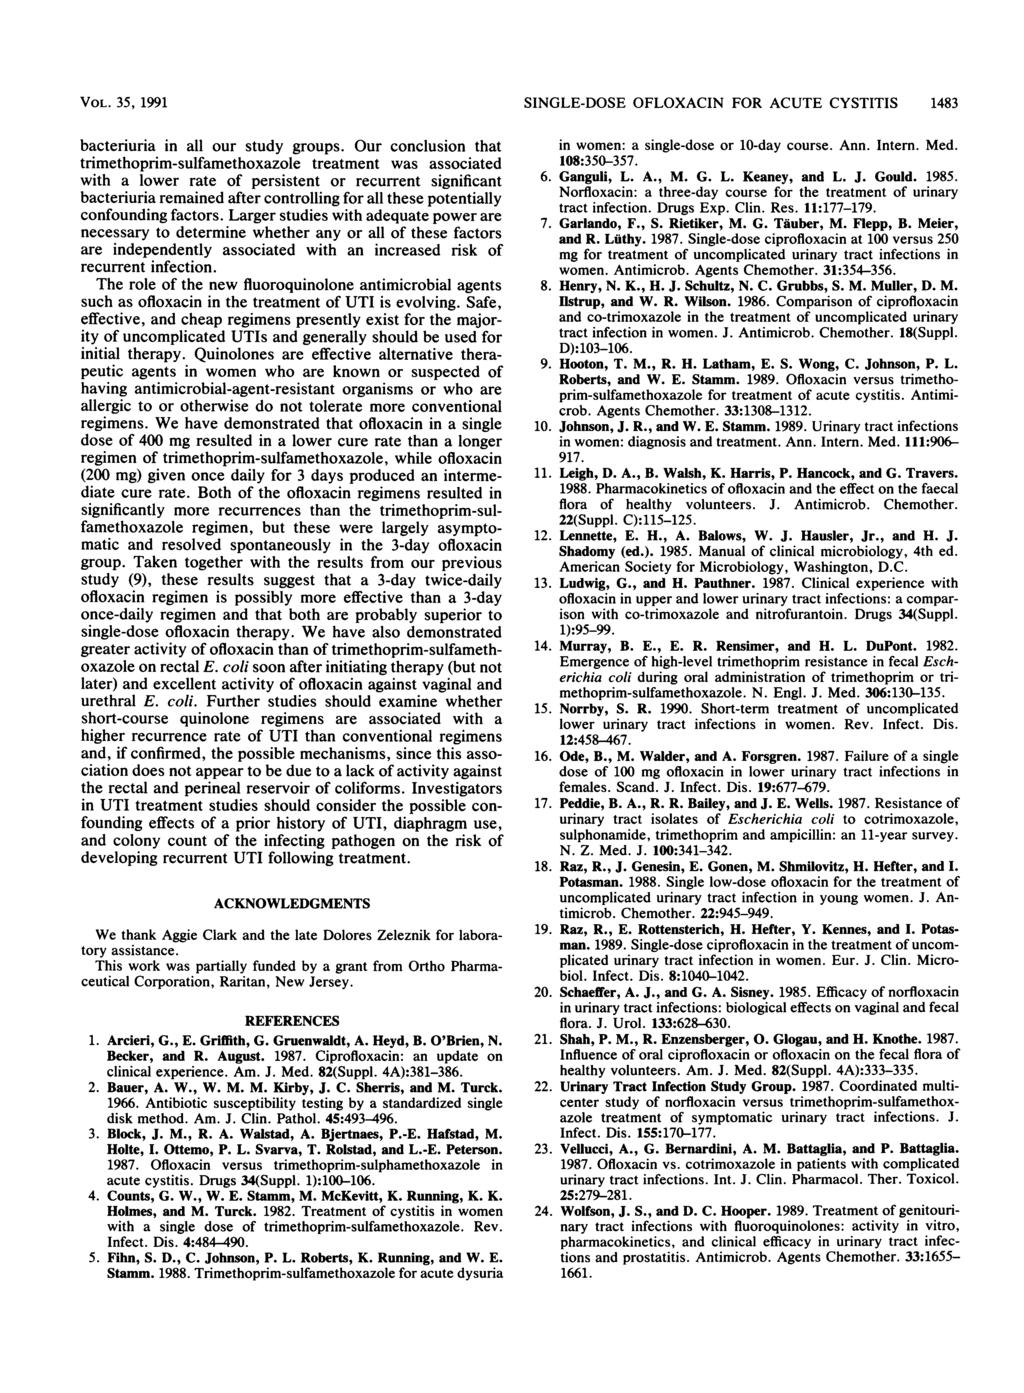 VOL. 35, 1991 bacteriuria in all our study groups.